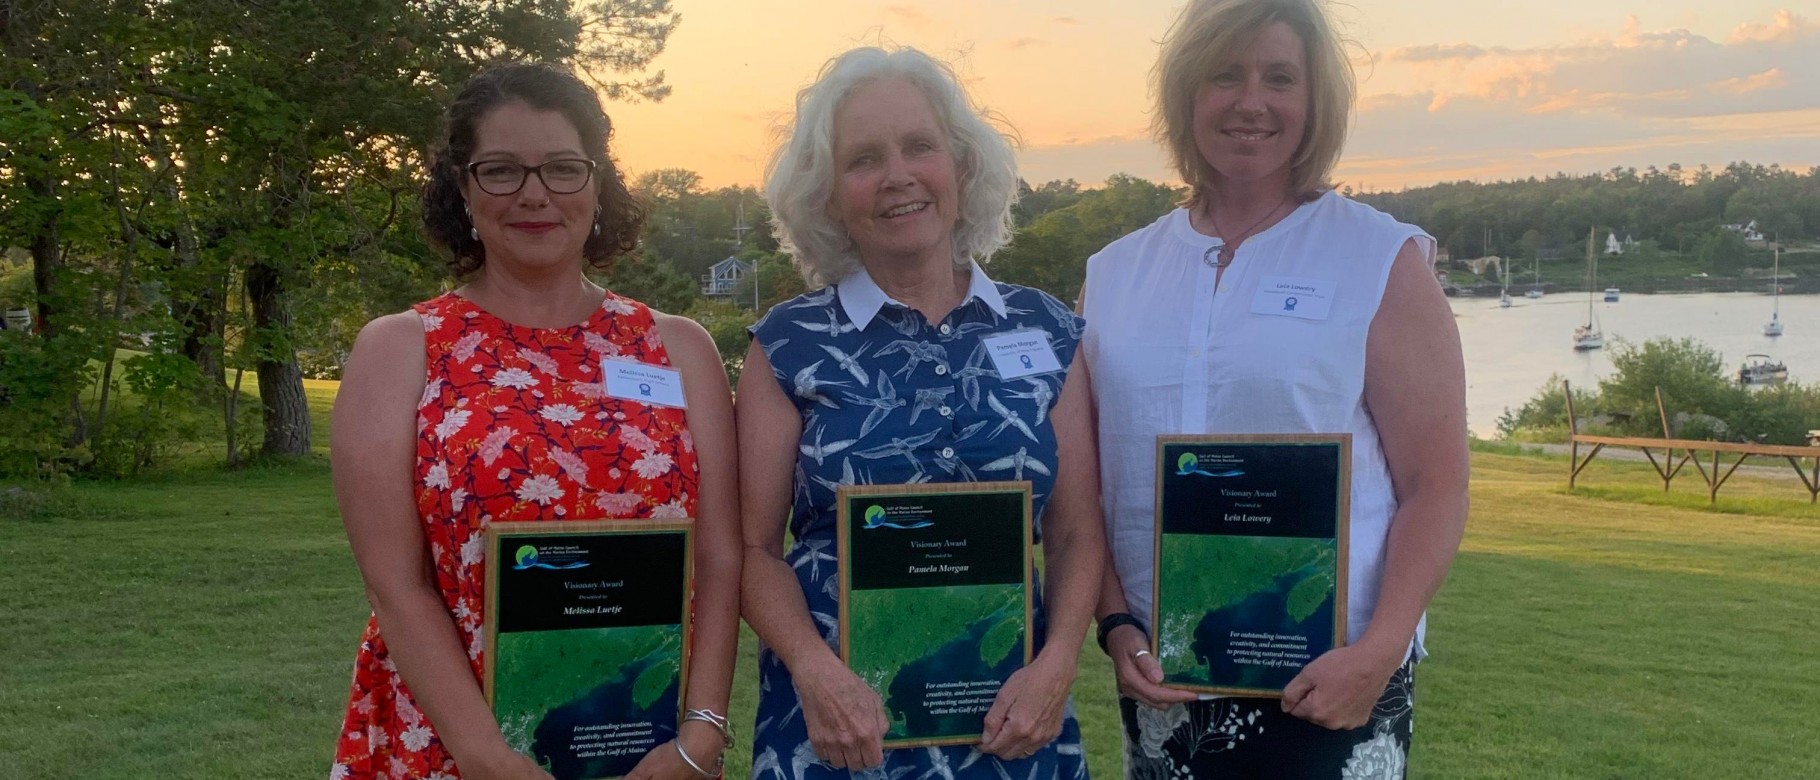 Melissa Luetje, Pam Morgan and Leia Lowery received their award during a ceremony in Nova Scotia